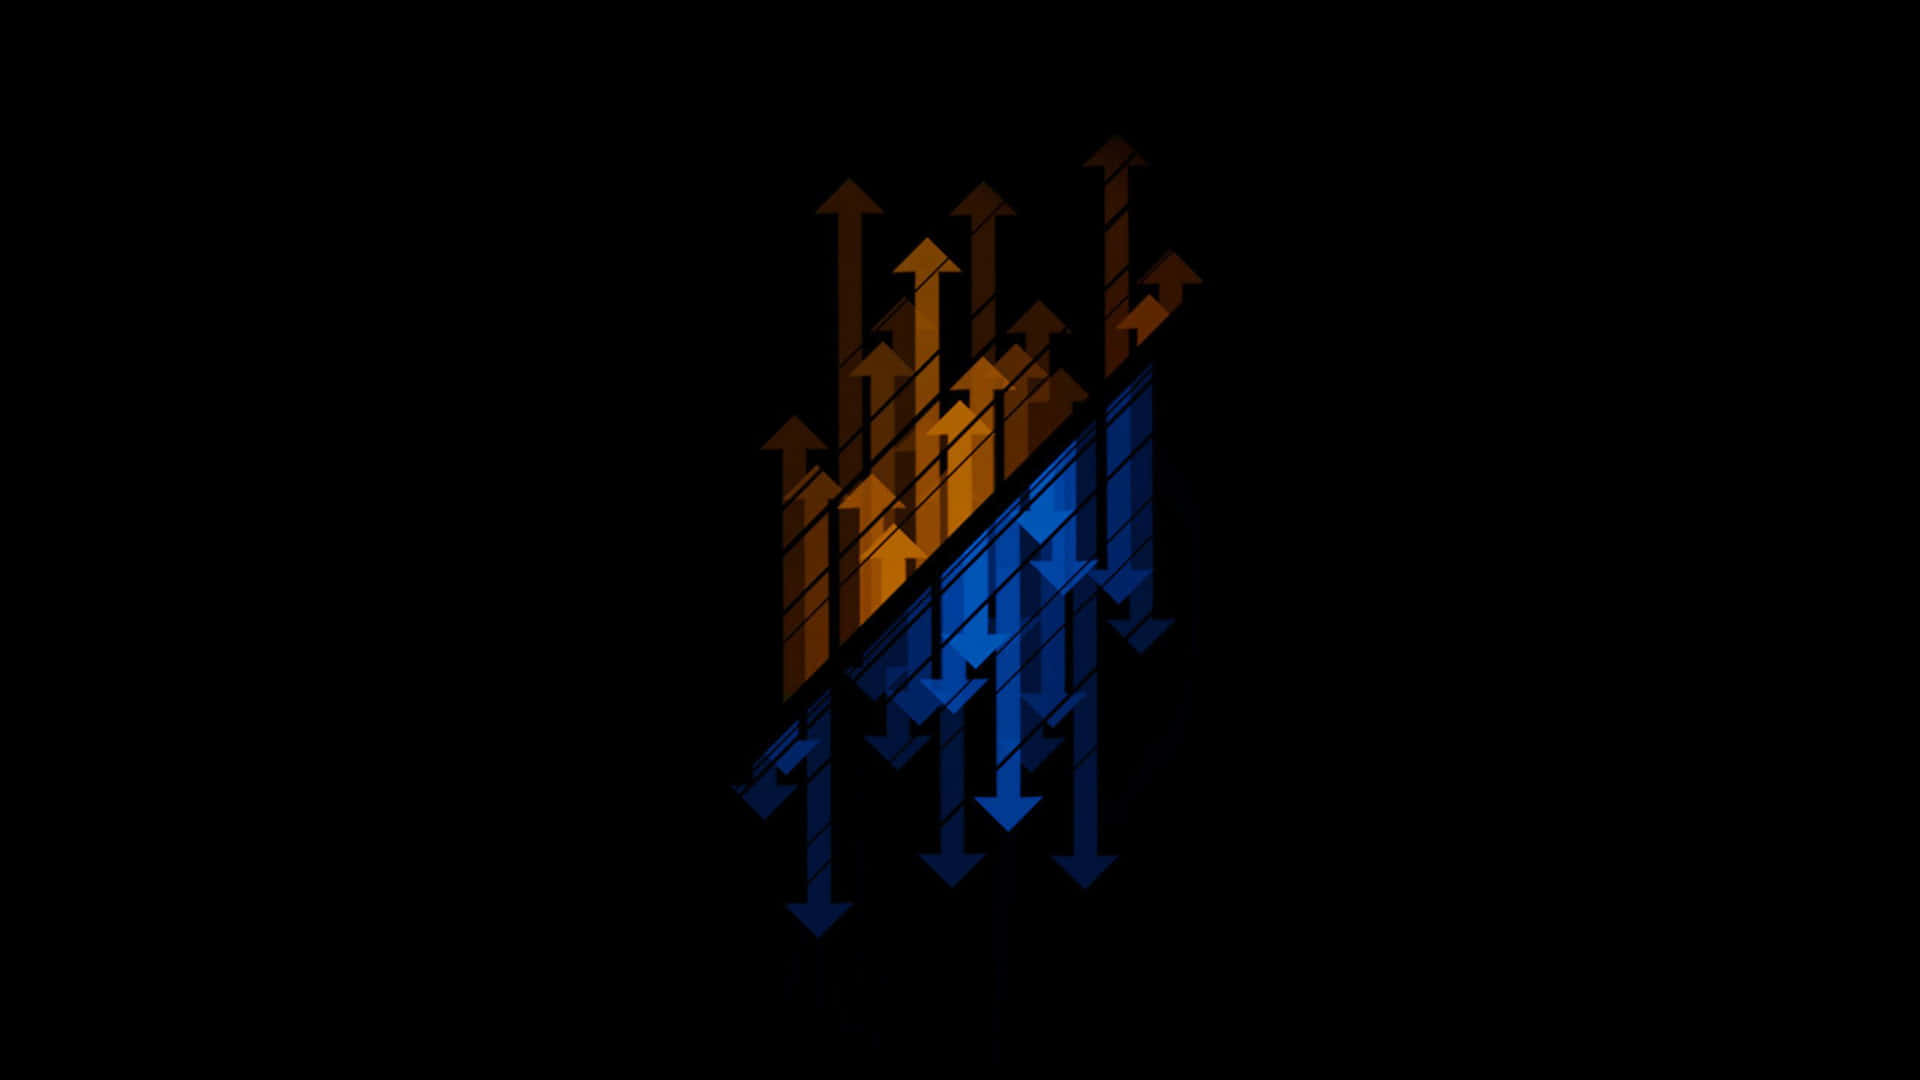 Arrows Pointing In The Dark With A Blue Background